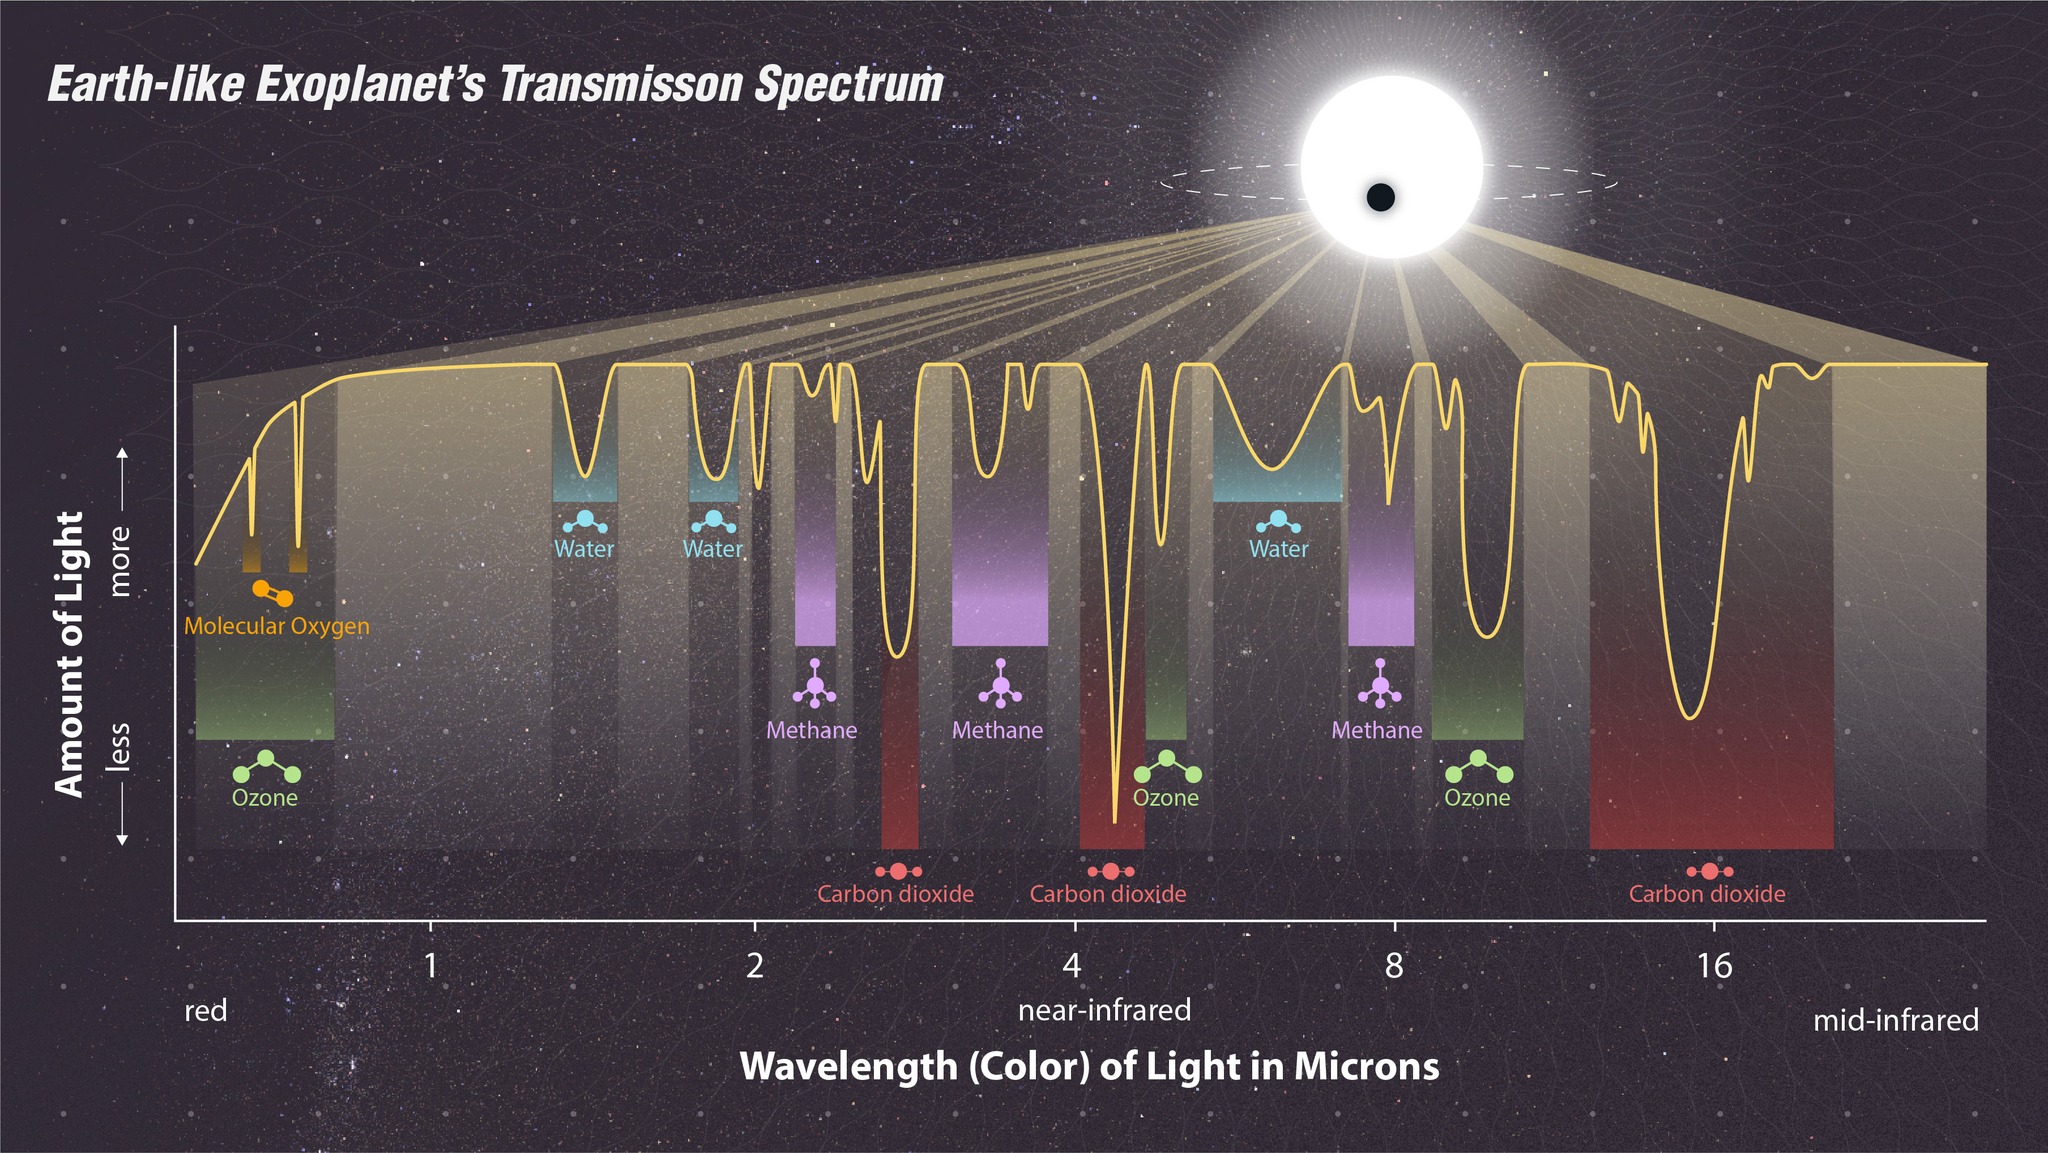 A simulated transmission spectrum of an Earth-like exoplanet reveals the absorption of water, carbon dioxide, methane and ozone at different wavelengths. Astronomers study exoplanet's transmission spectrum to reveal the atmospheric compositions.                                           Image credit: NASA, ESA, CSA, STScI, Joseph Olmsted (STScI)